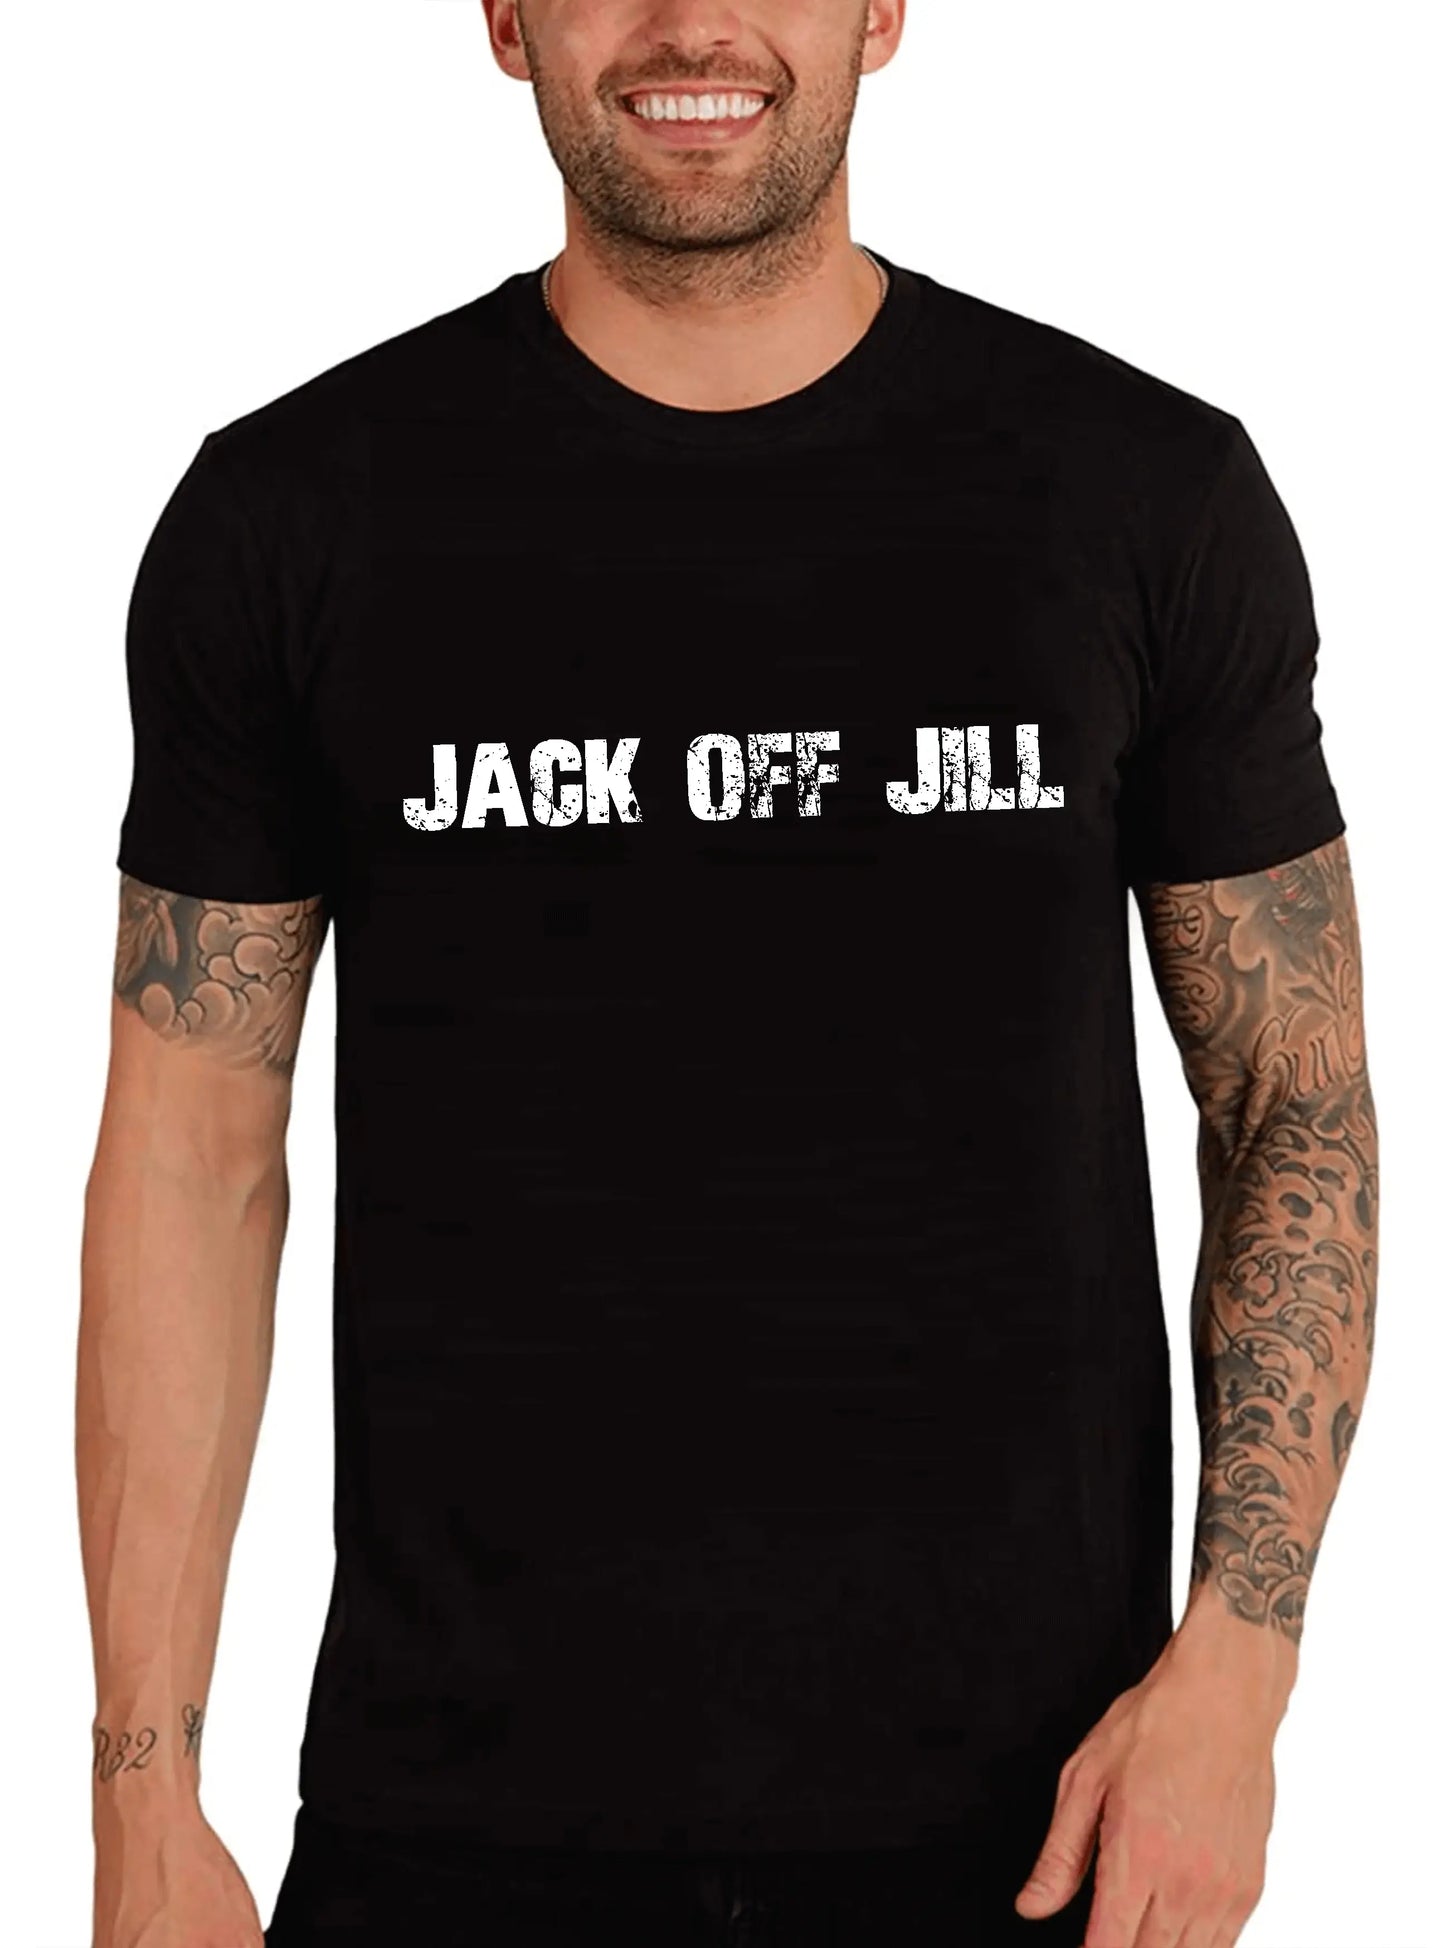 Men's Graphic T-Shirt Jack Off Jill Eco-Friendly Limited Edition Short Sleeve Tee-Shirt Vintage Birthday Gift Novelty